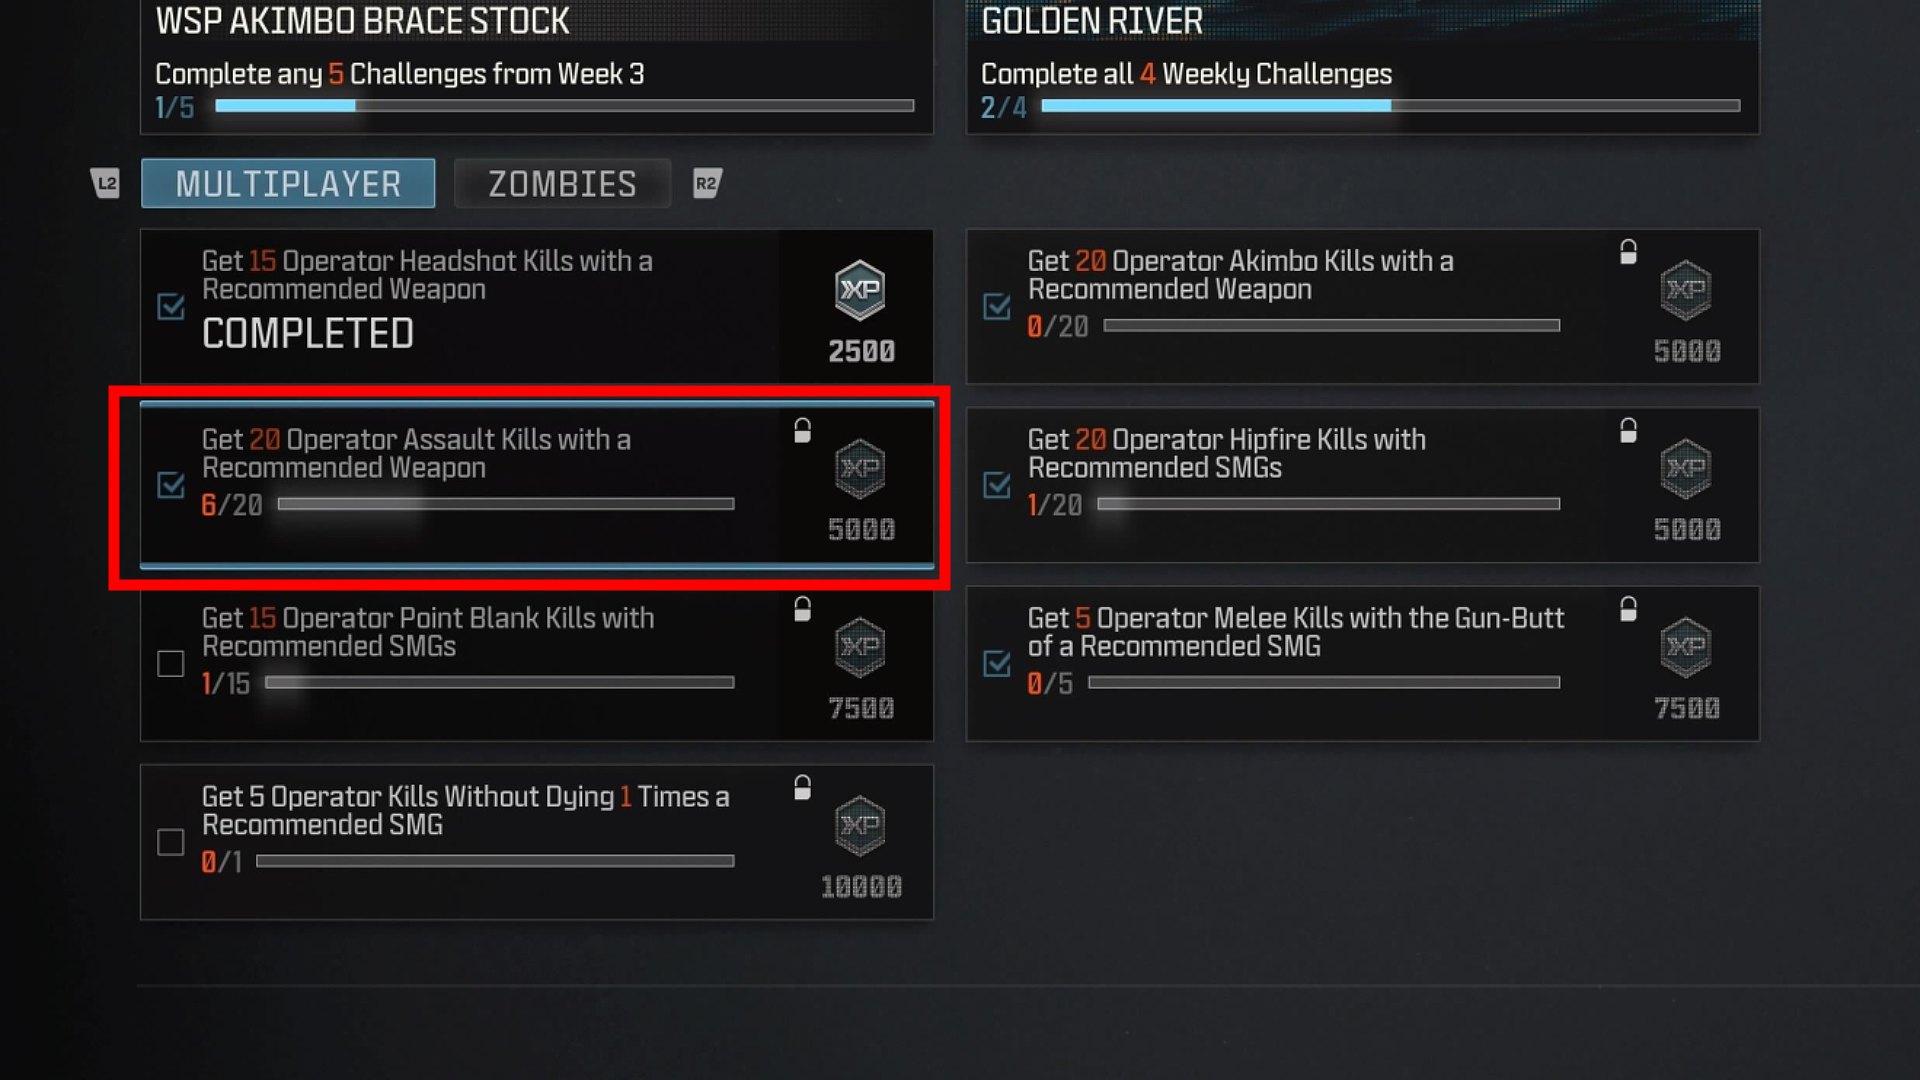 The MW3 Week 3 challenges with the Operator Assault Kills one highlighted